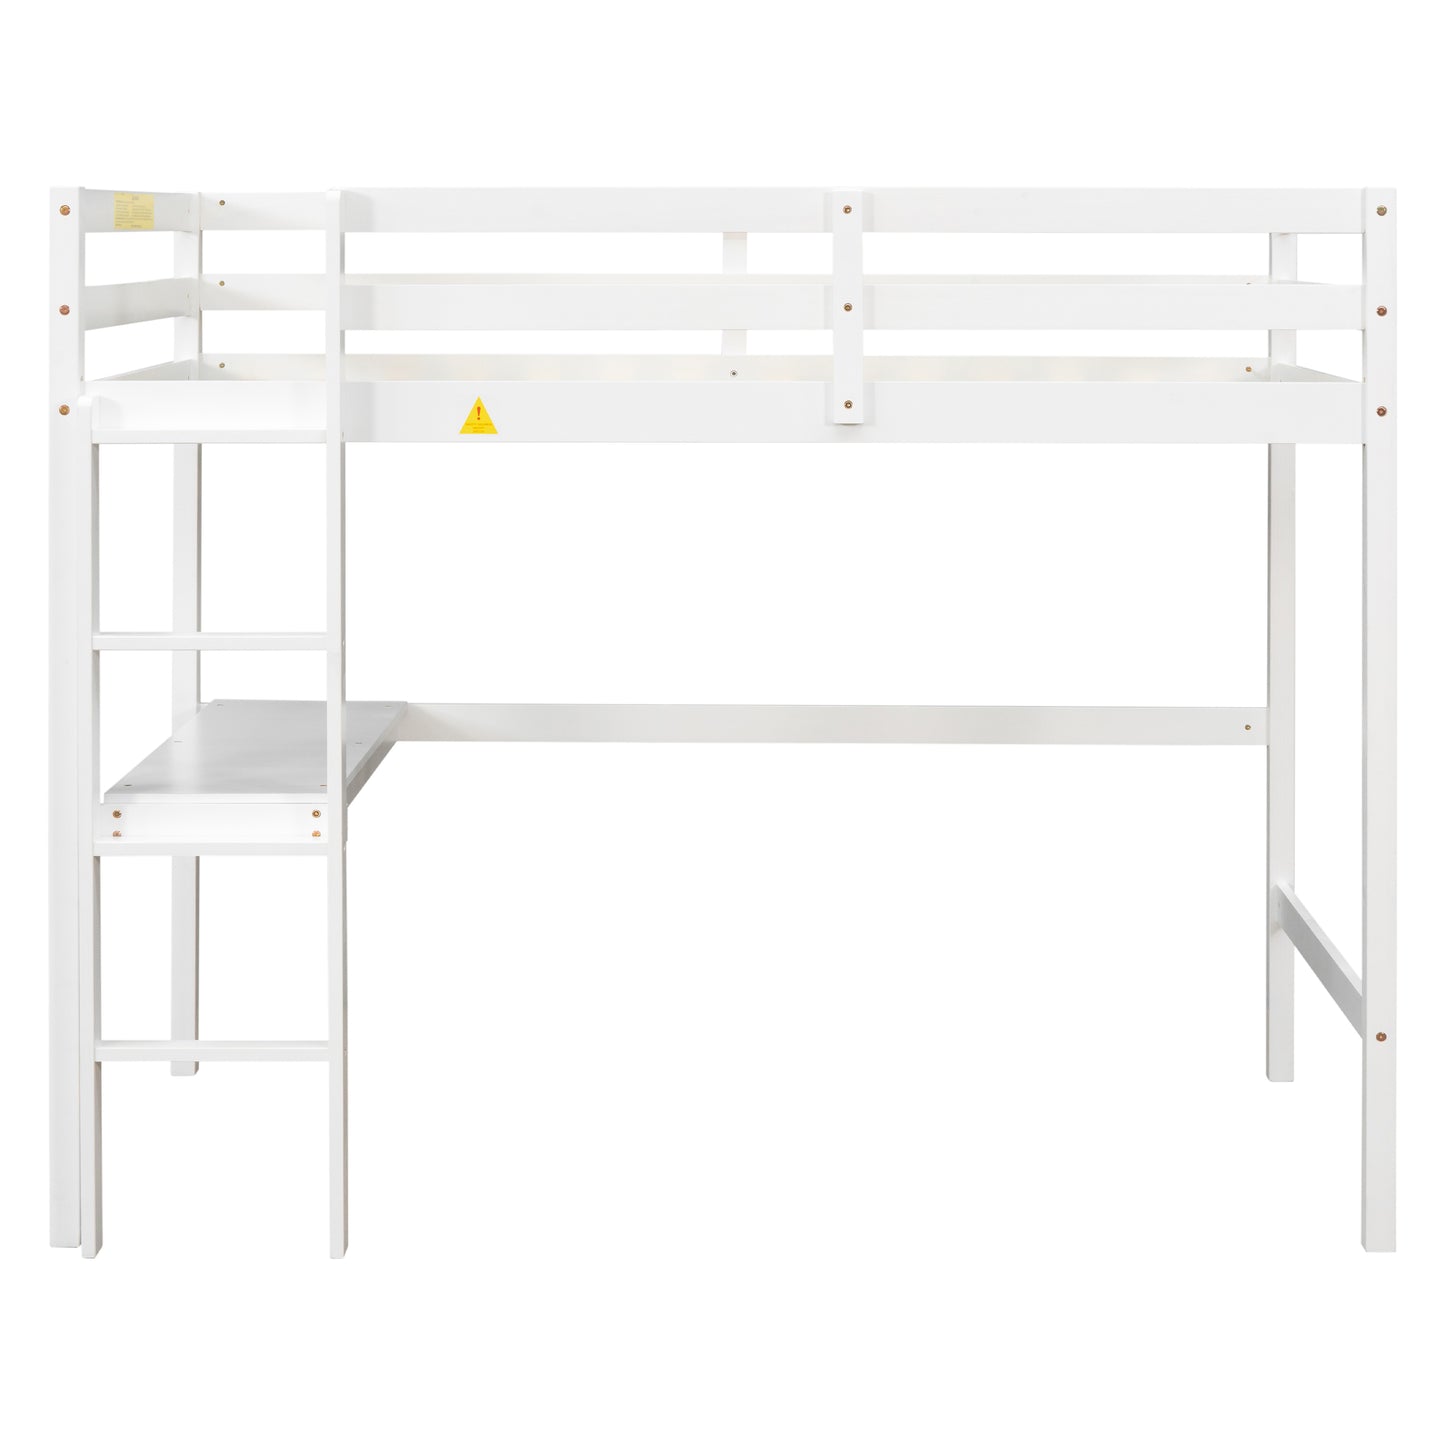 Wooden Twin Loft Bed with Desk, Twin Size Bunk Bed with Workstation Desk, Safety Rail, Wider Ladder for Kids Teens Adults, Space Saving Design, No Spring Box needed, White